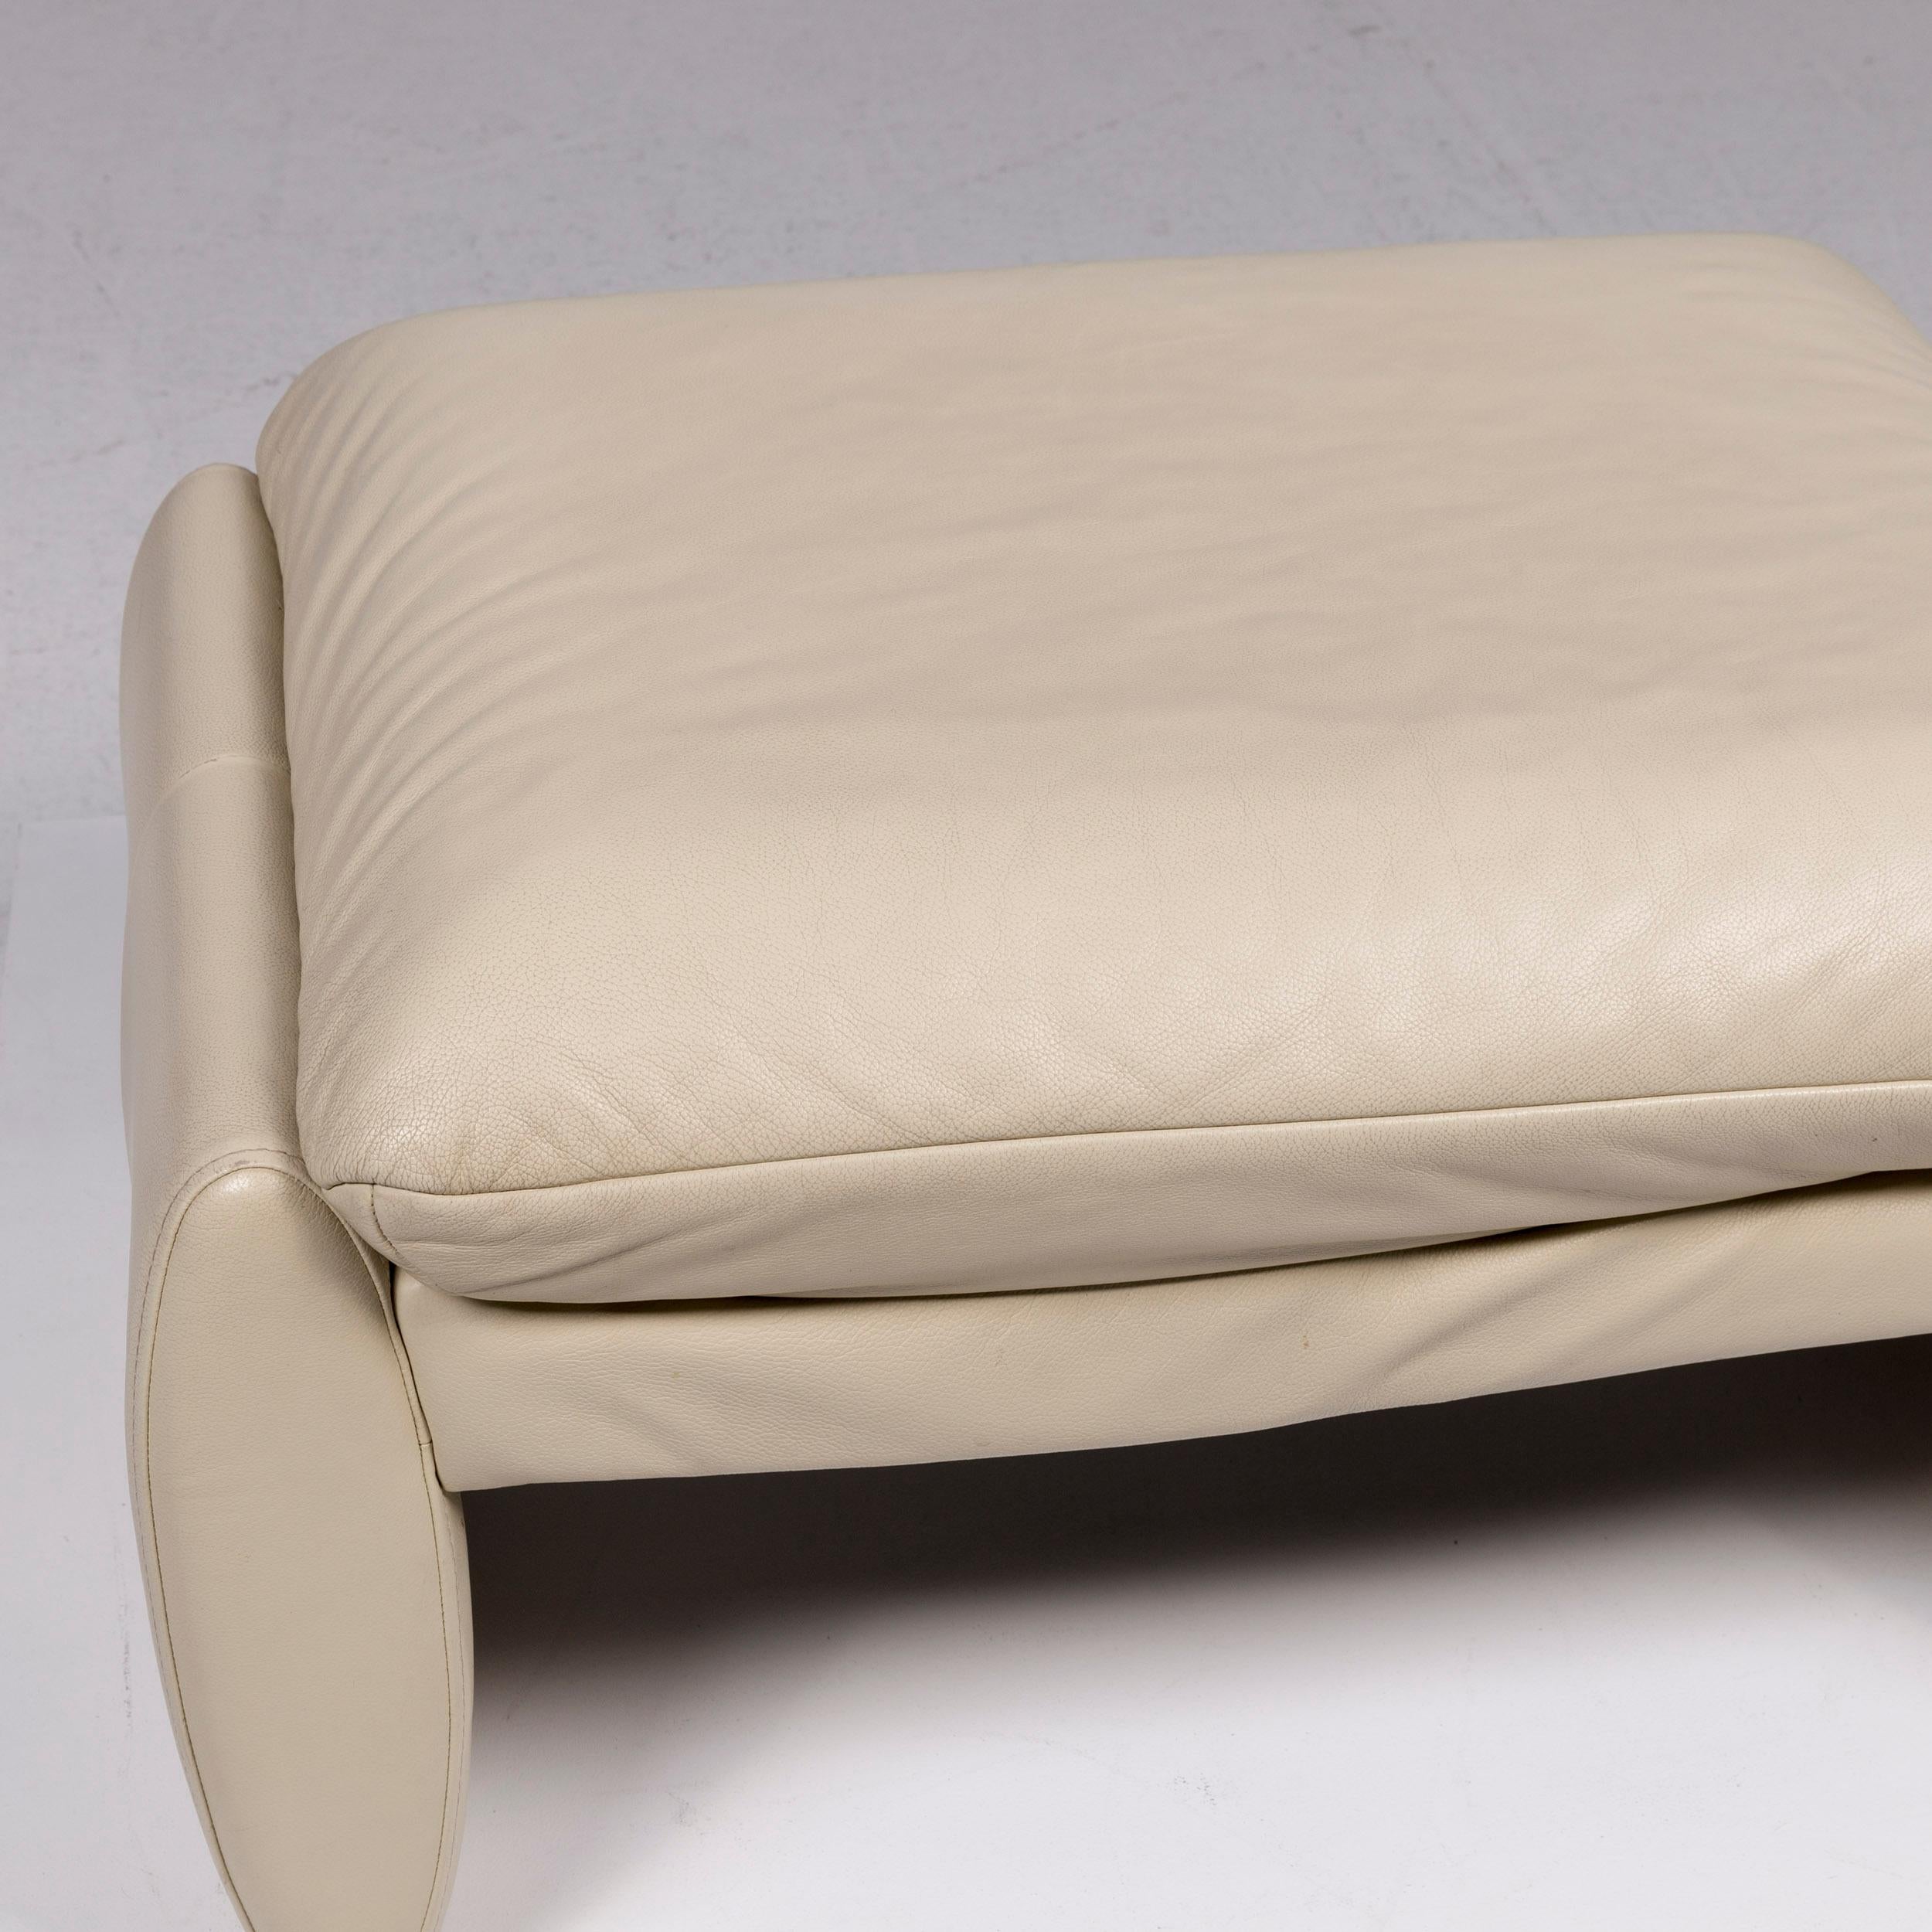 We bring to you a Laauser leather stool cream stool.

Product measurements in centimetres:
 
Depth 55
Width 79
Height 43.





   